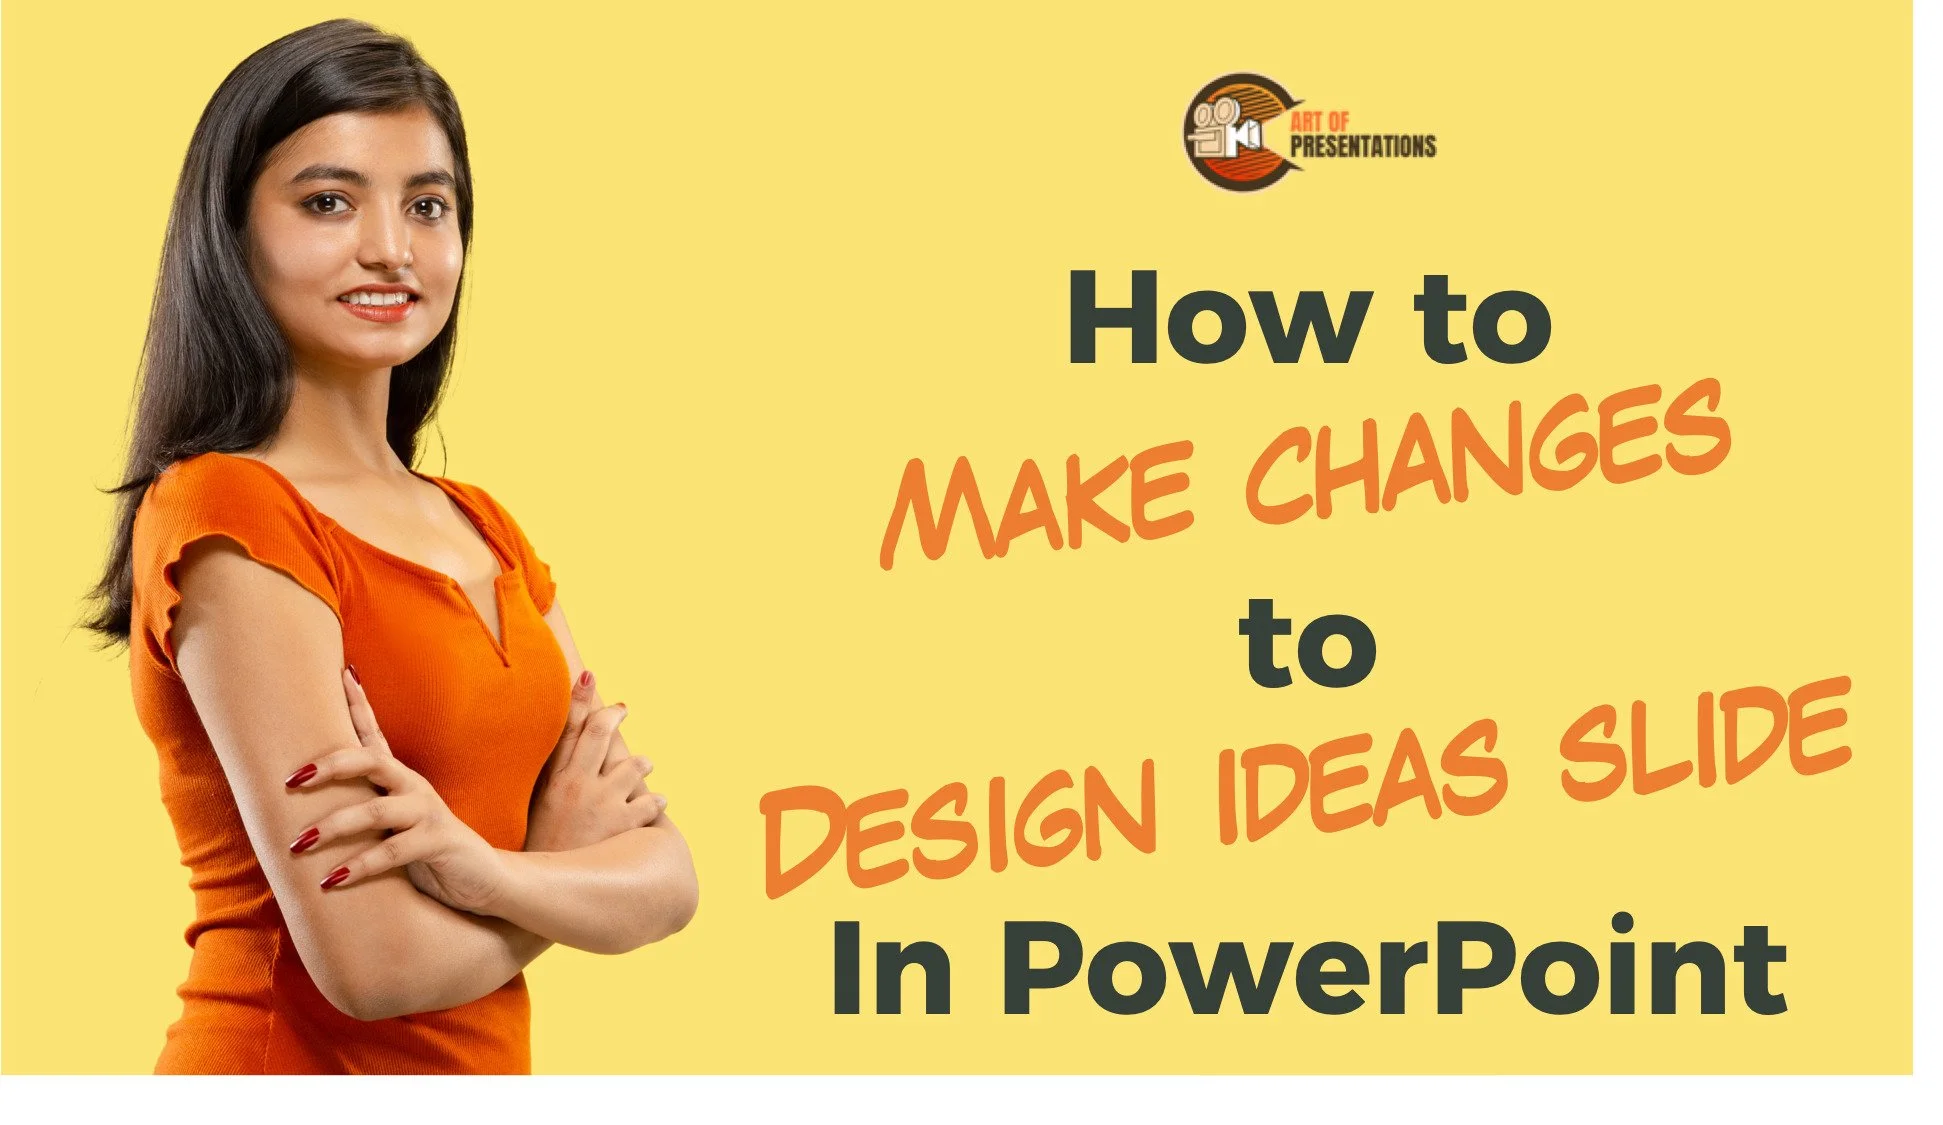 How to Make Changes to Design Ideas Slide in PowerPoint?